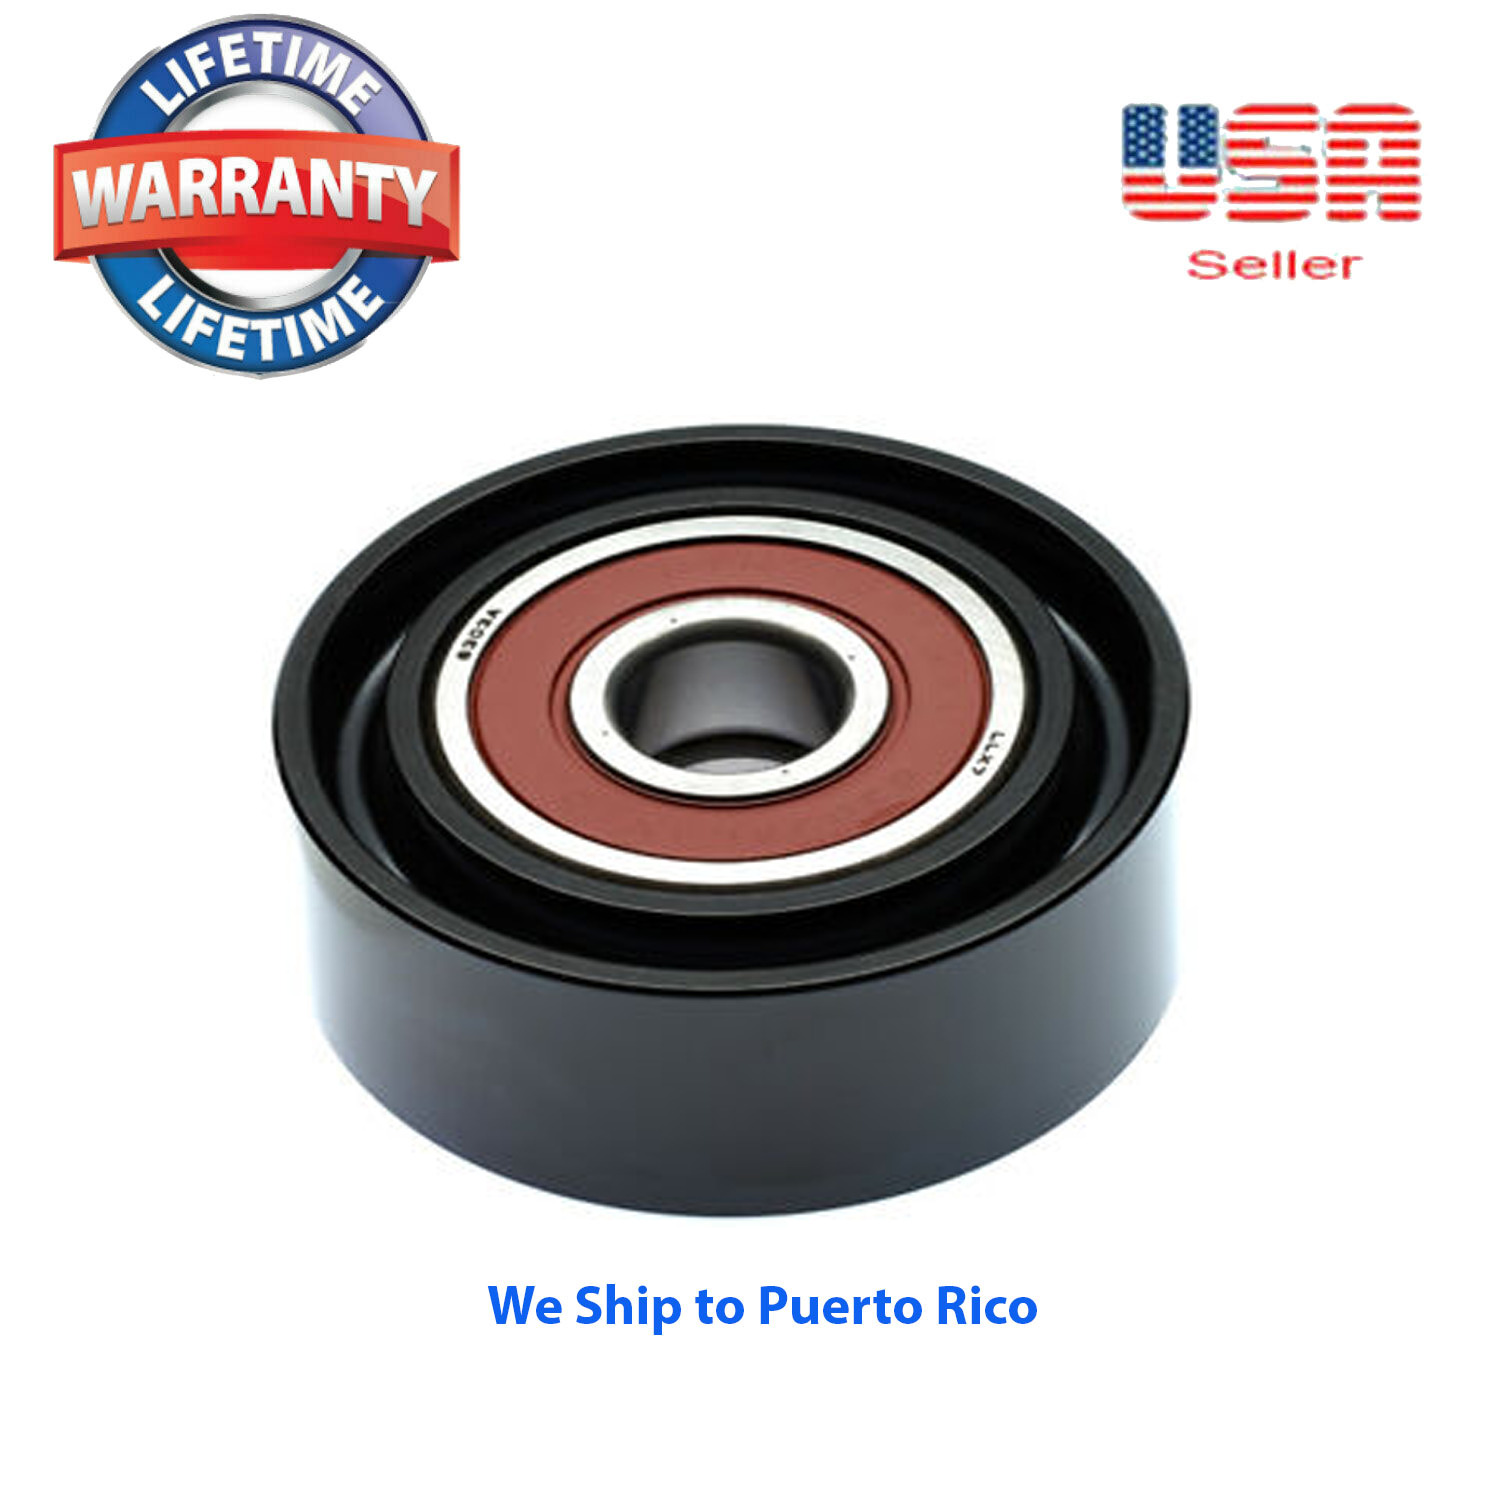 Lower Idler Pulley Fits: 36614, 88440-25070 4Runner Hilux Tacoma 2005-2019 2.7L